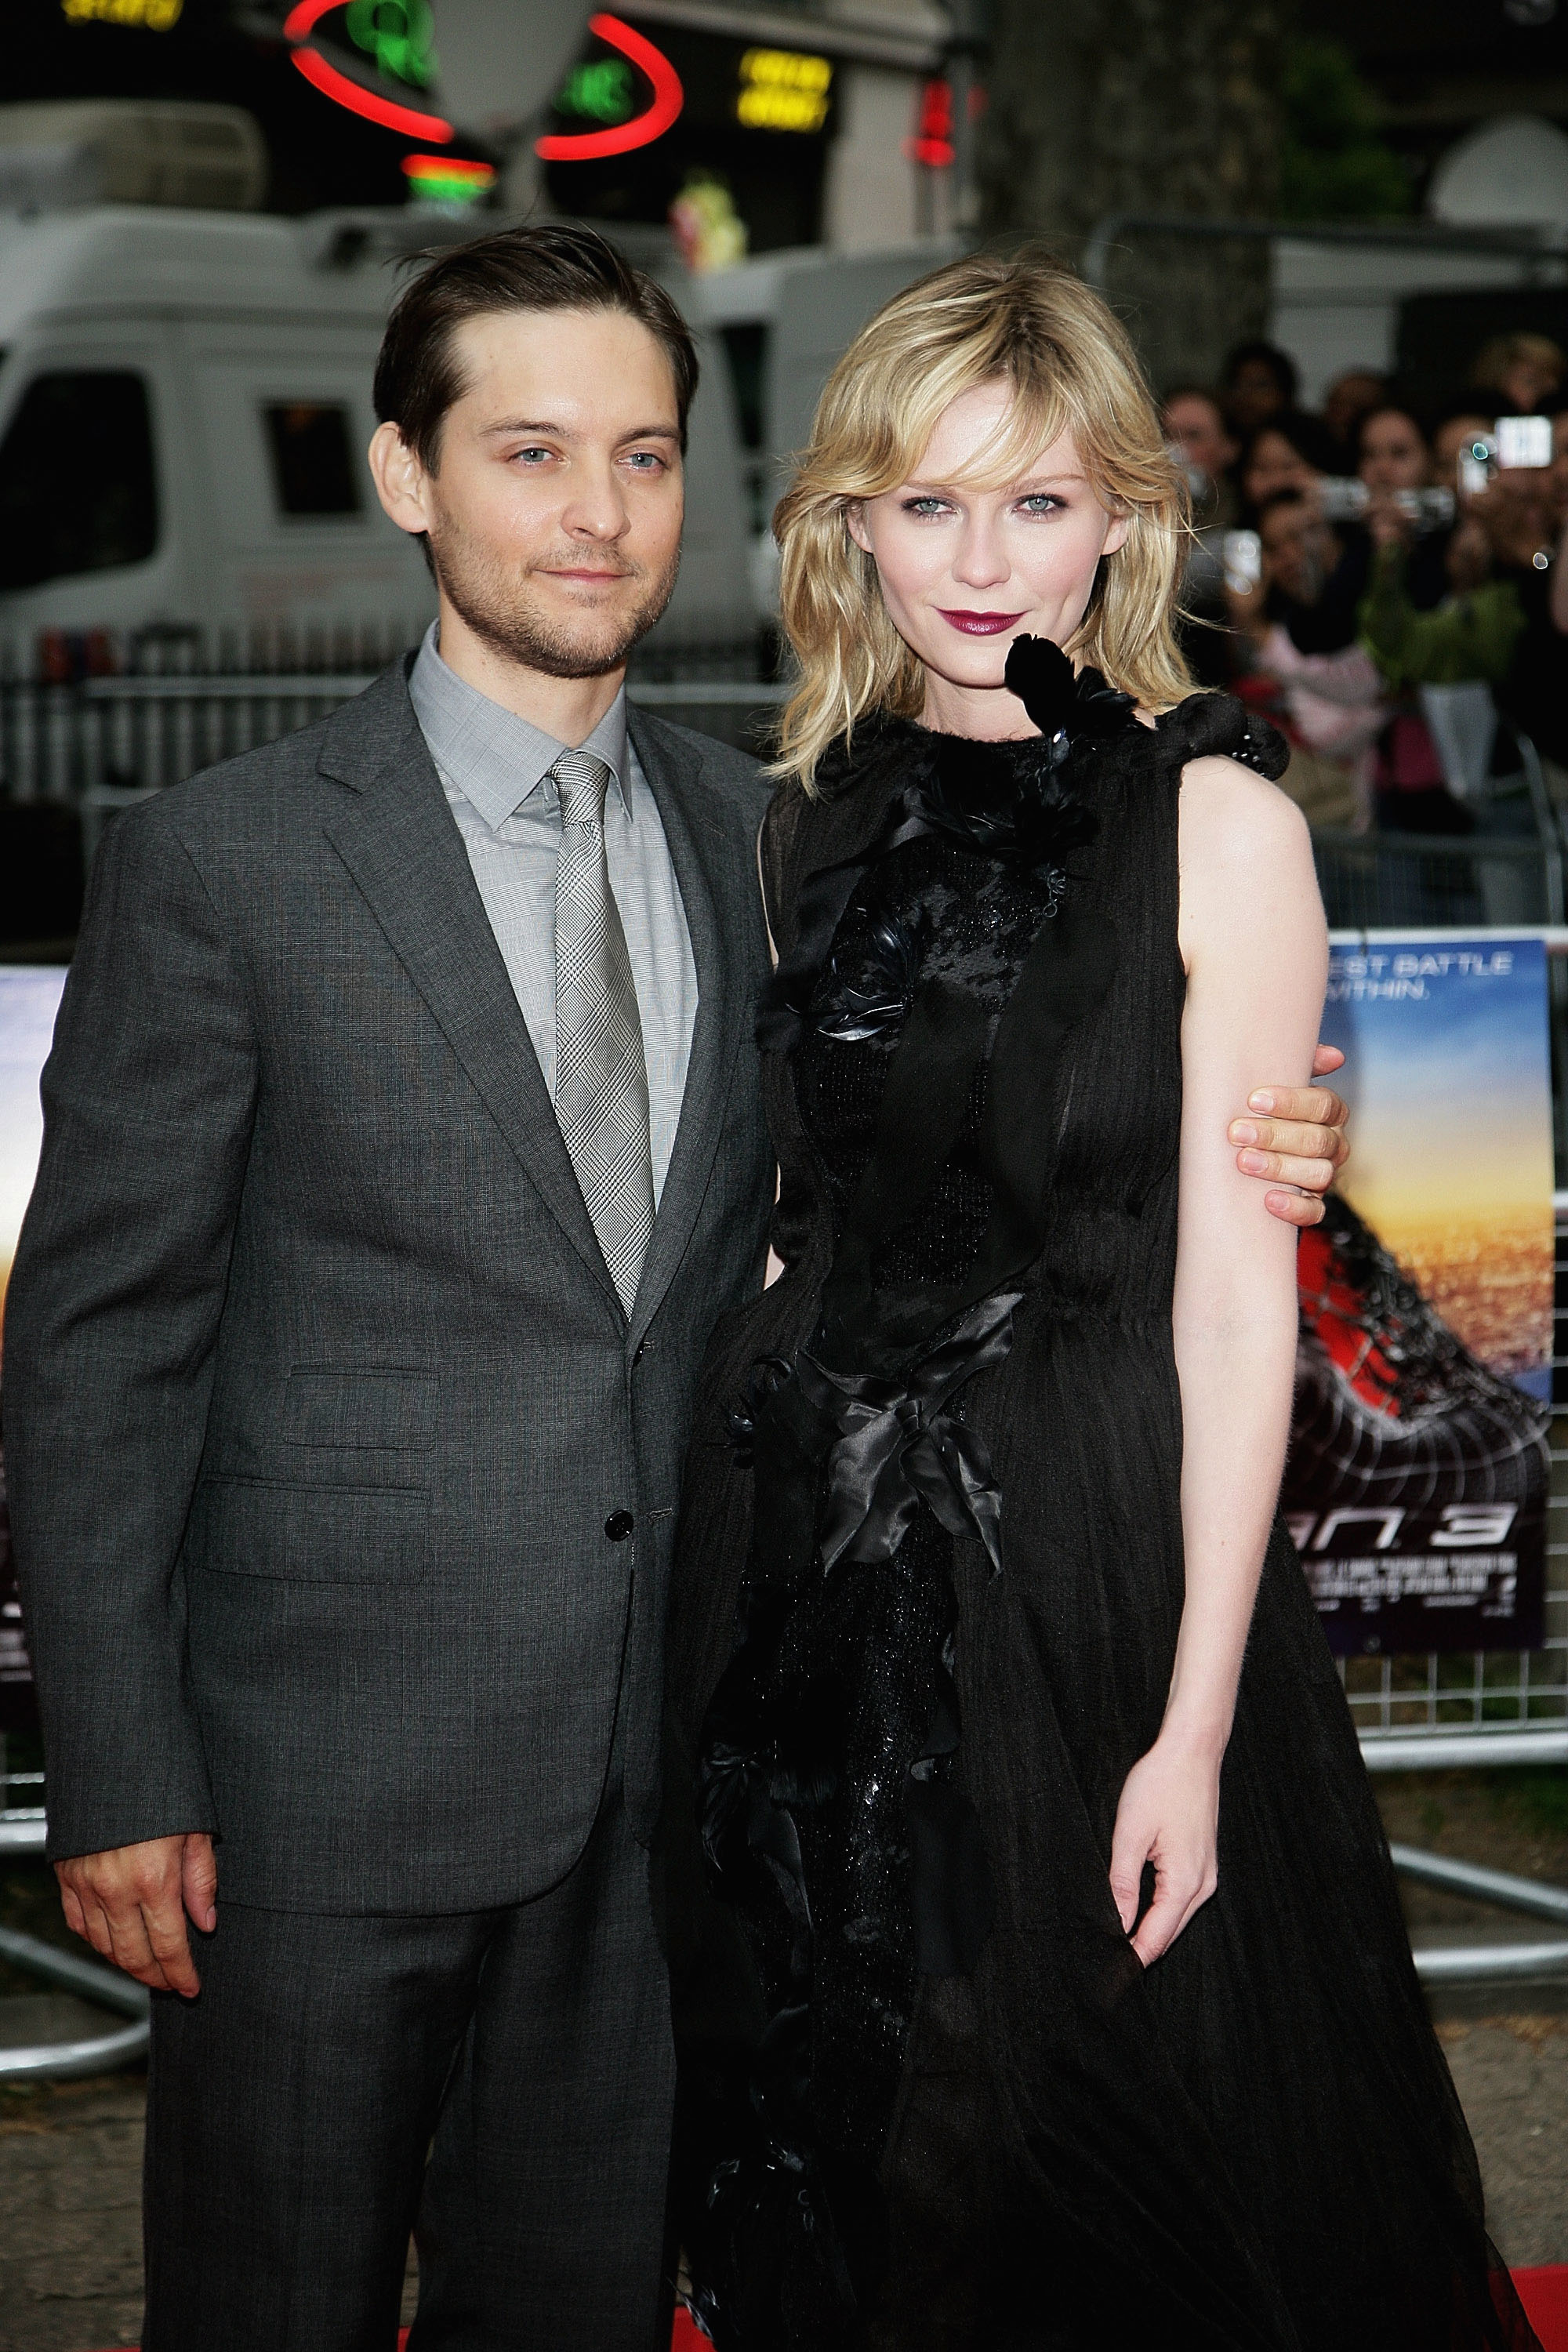 Tobey Maguire and Kirsten Dunst standing together; he&#x27;s in a gray suit, she&#x27;s in a black ruffled dress